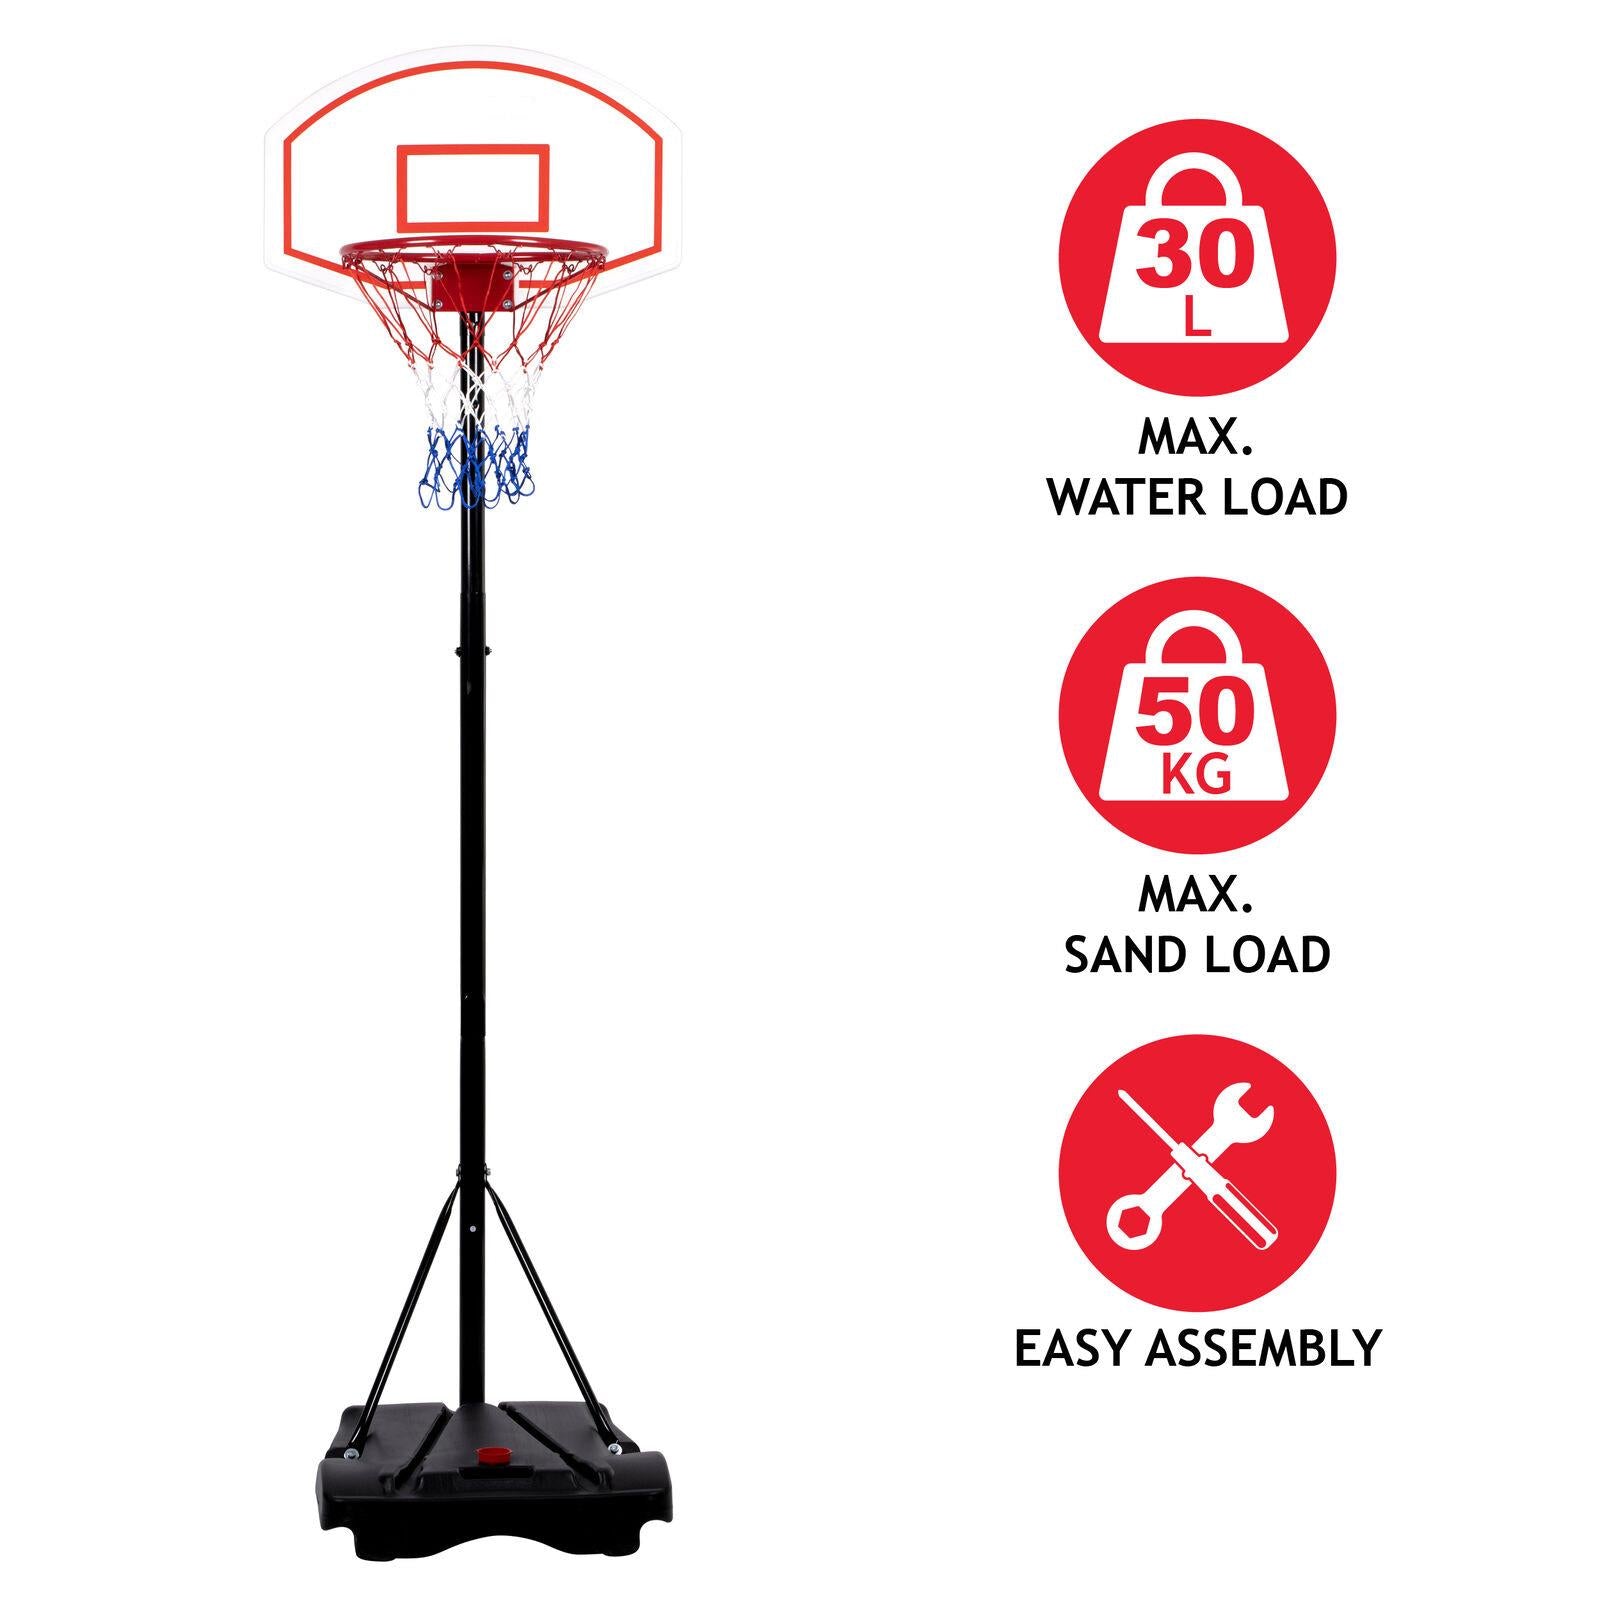 Portable Basketball Stand with Hoop by The Magic Toy Shop - The Magic Toy Shop